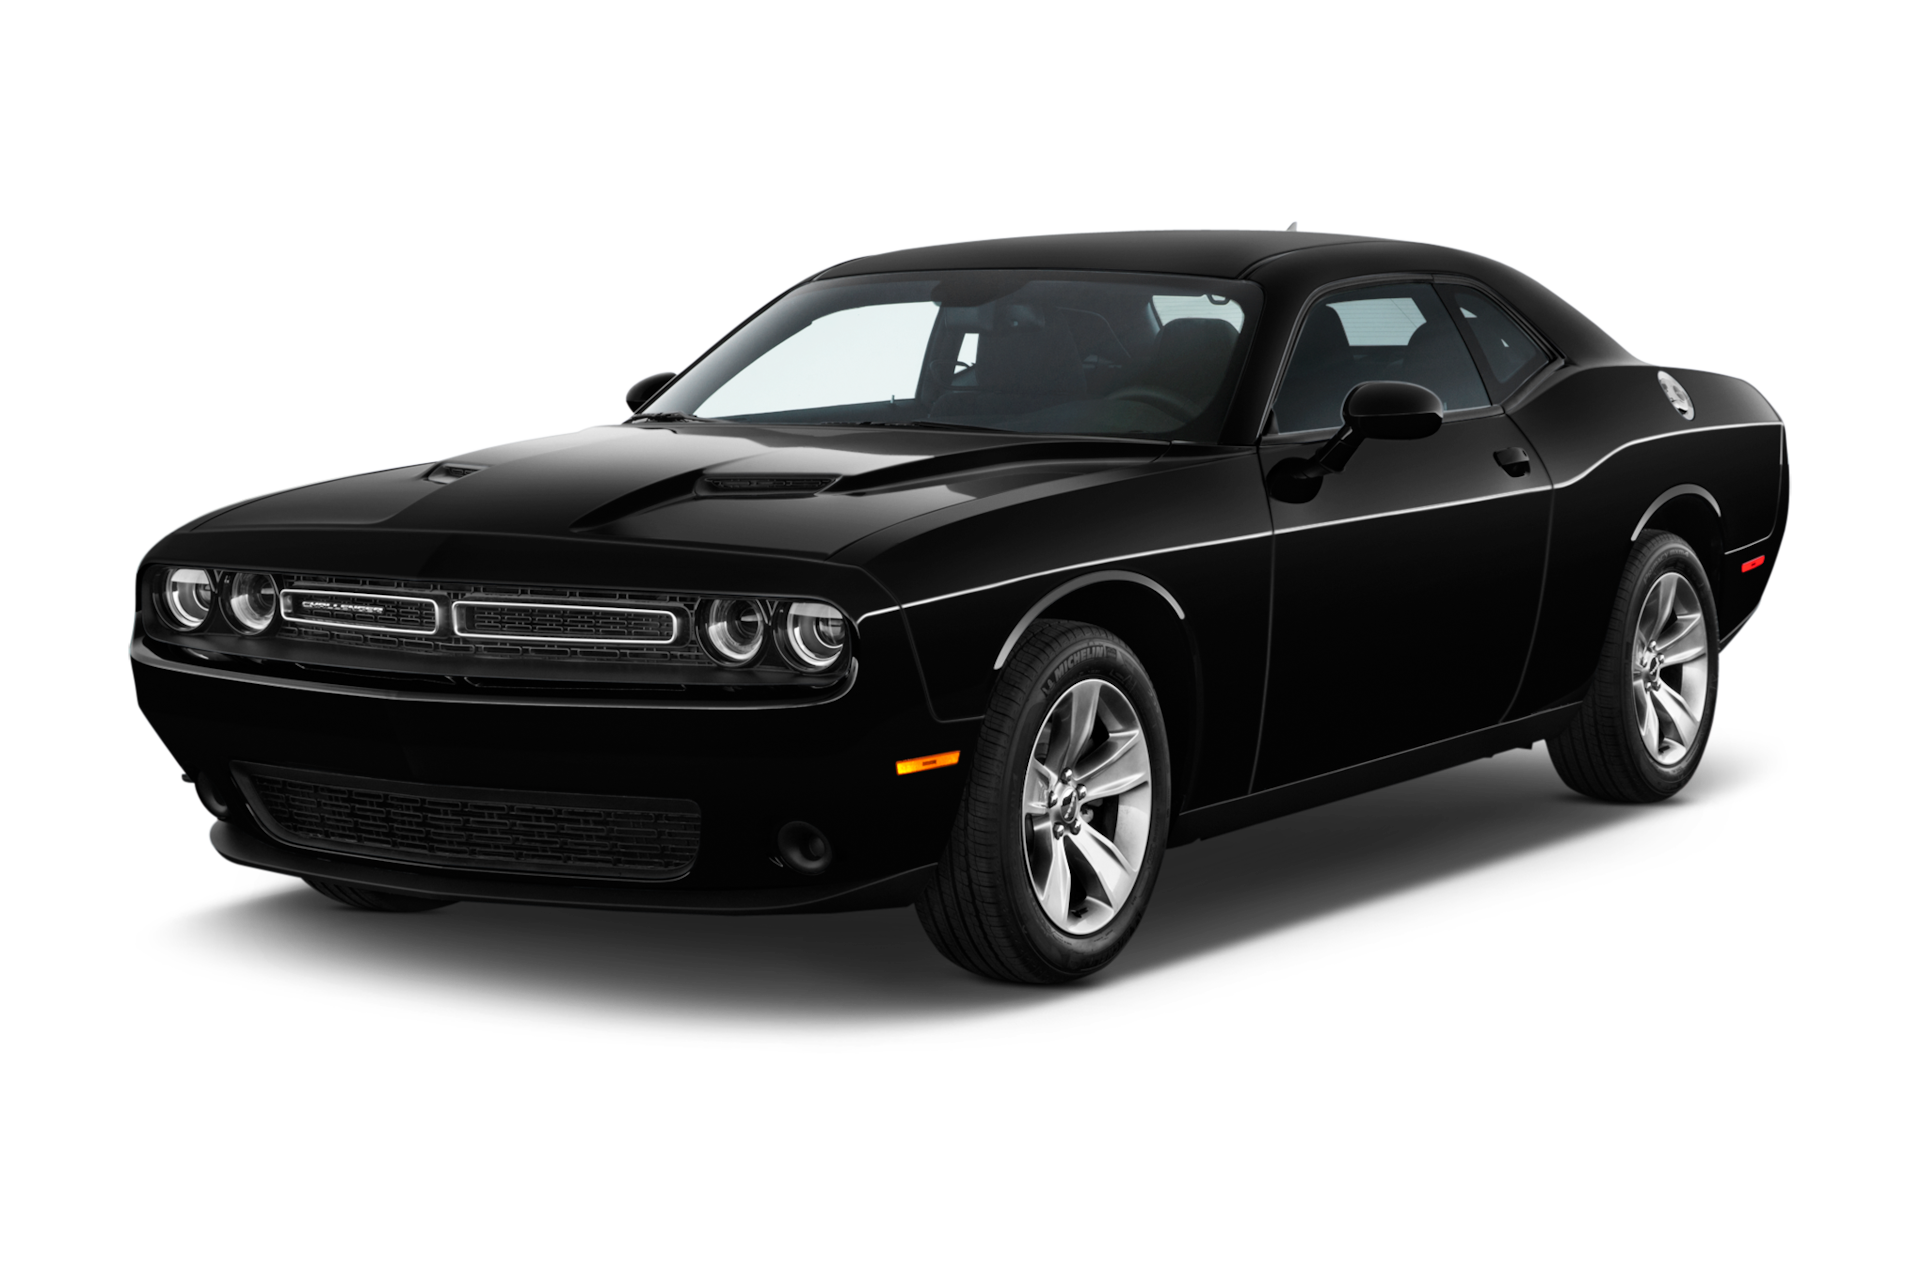 2017 Dodge Challenger Prices, Reviews, and Photos - MotorTrend